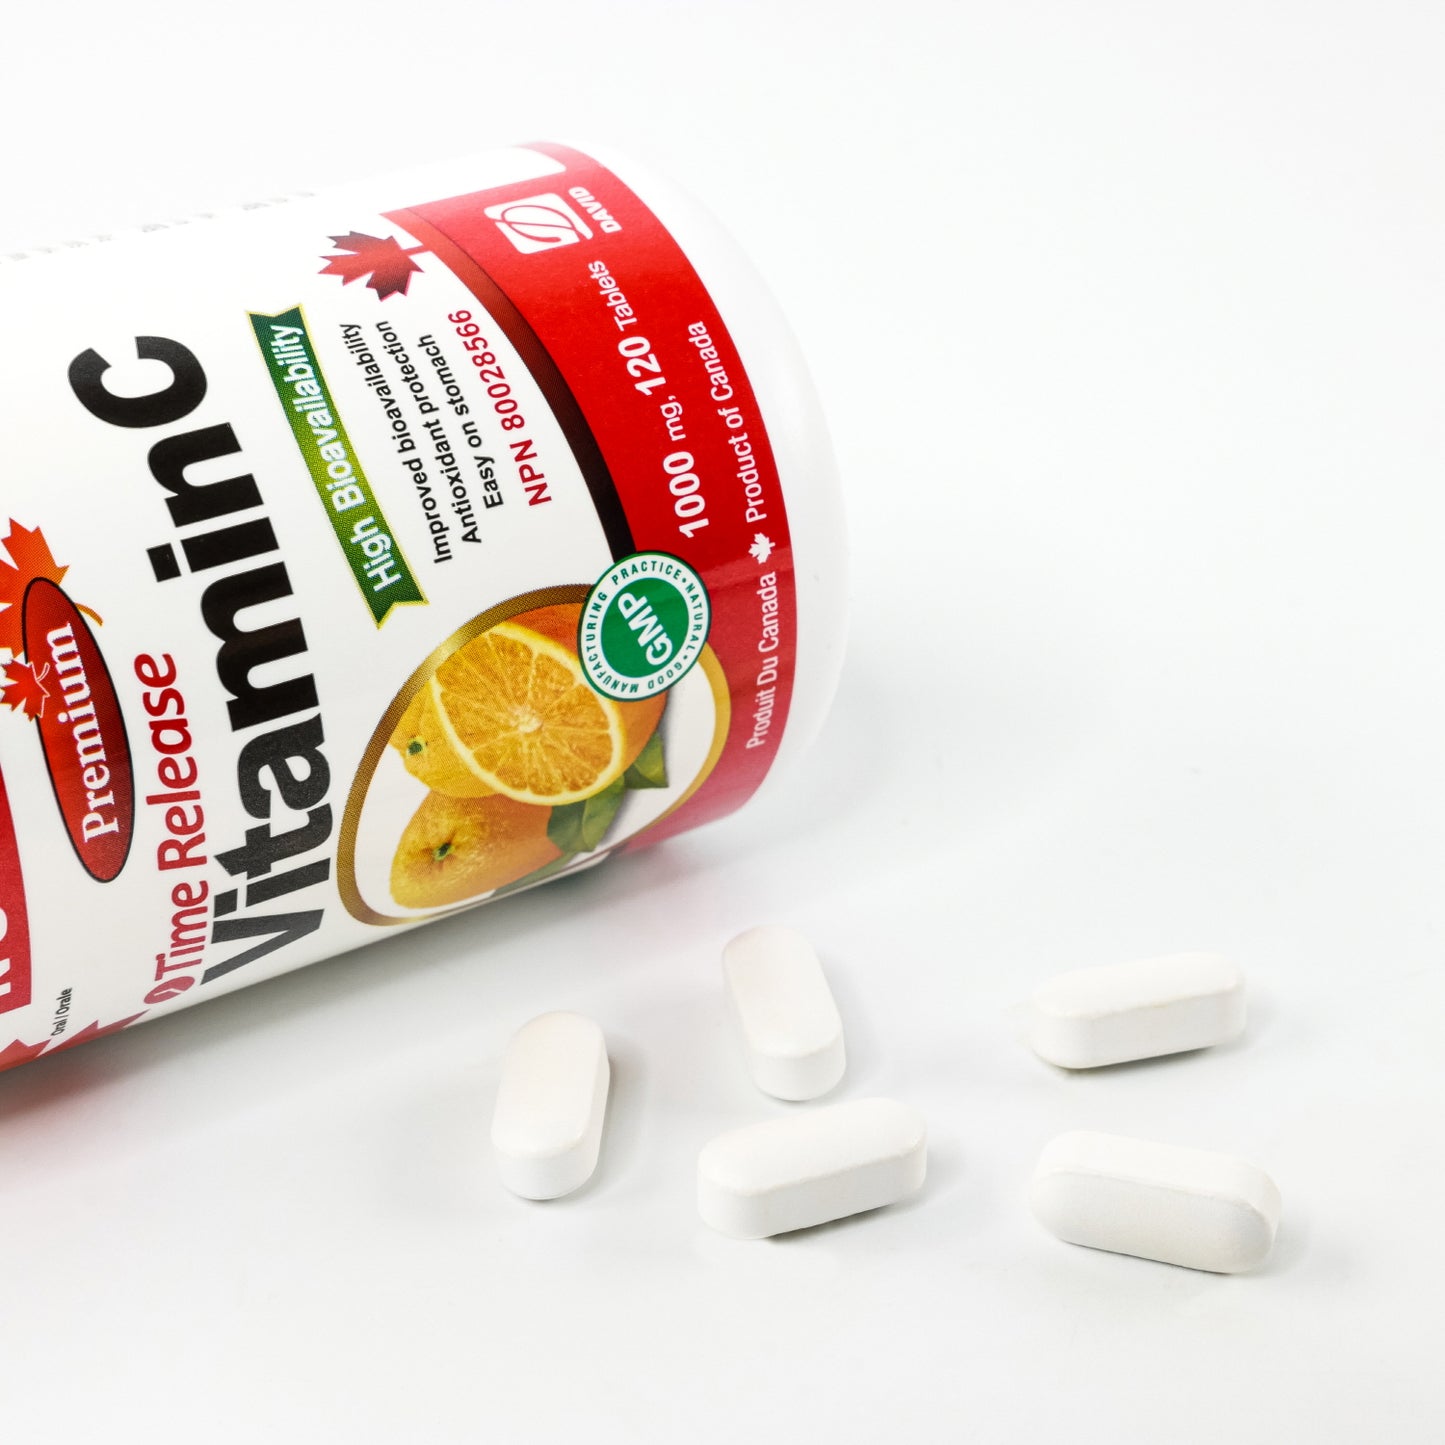 Nutridom Timed-Release Vitamin C 1000mg with Citrus Bioflavonoids & Rose hip (120 Tablets)